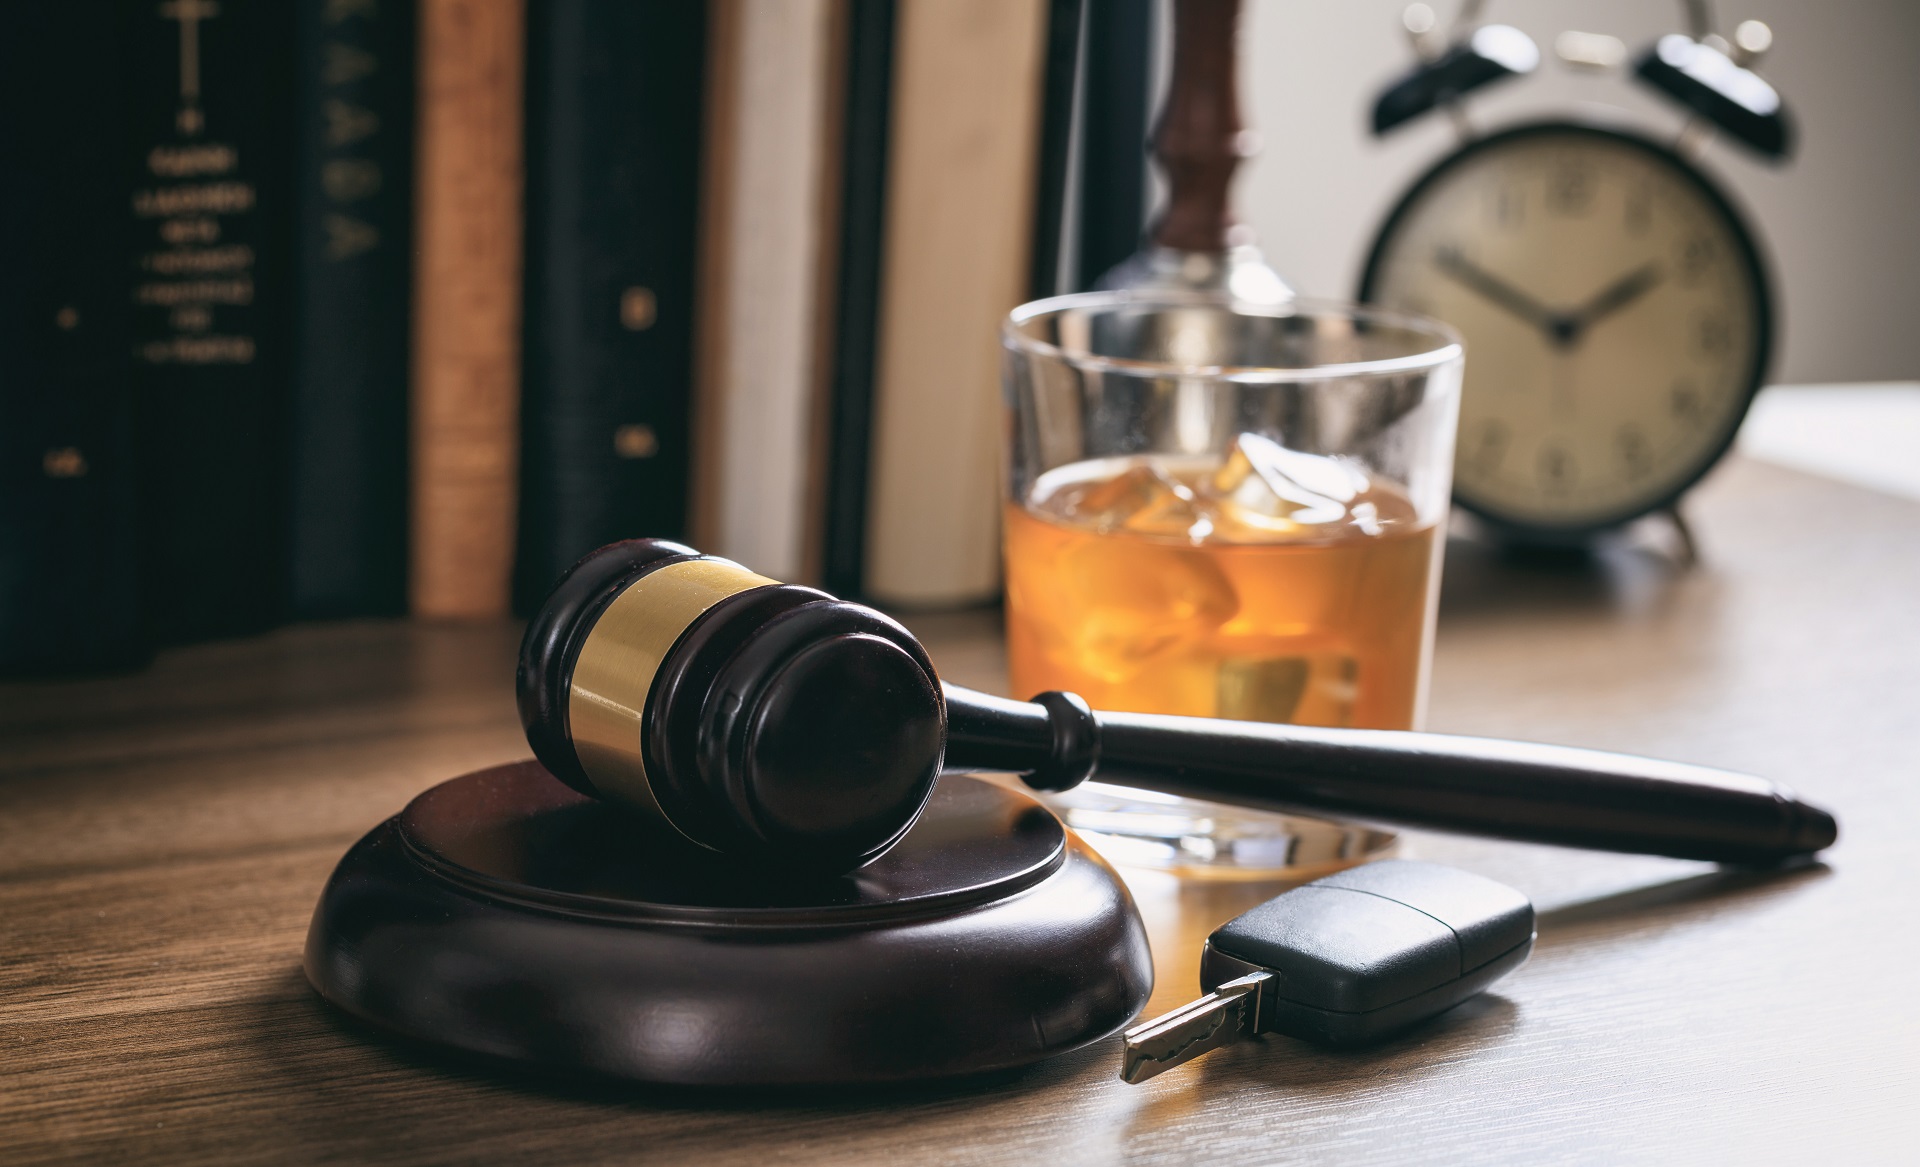 A judge's gavel and a glass of wine on a desk | DUI Defense Lawyer in LA | Wegman & Levin